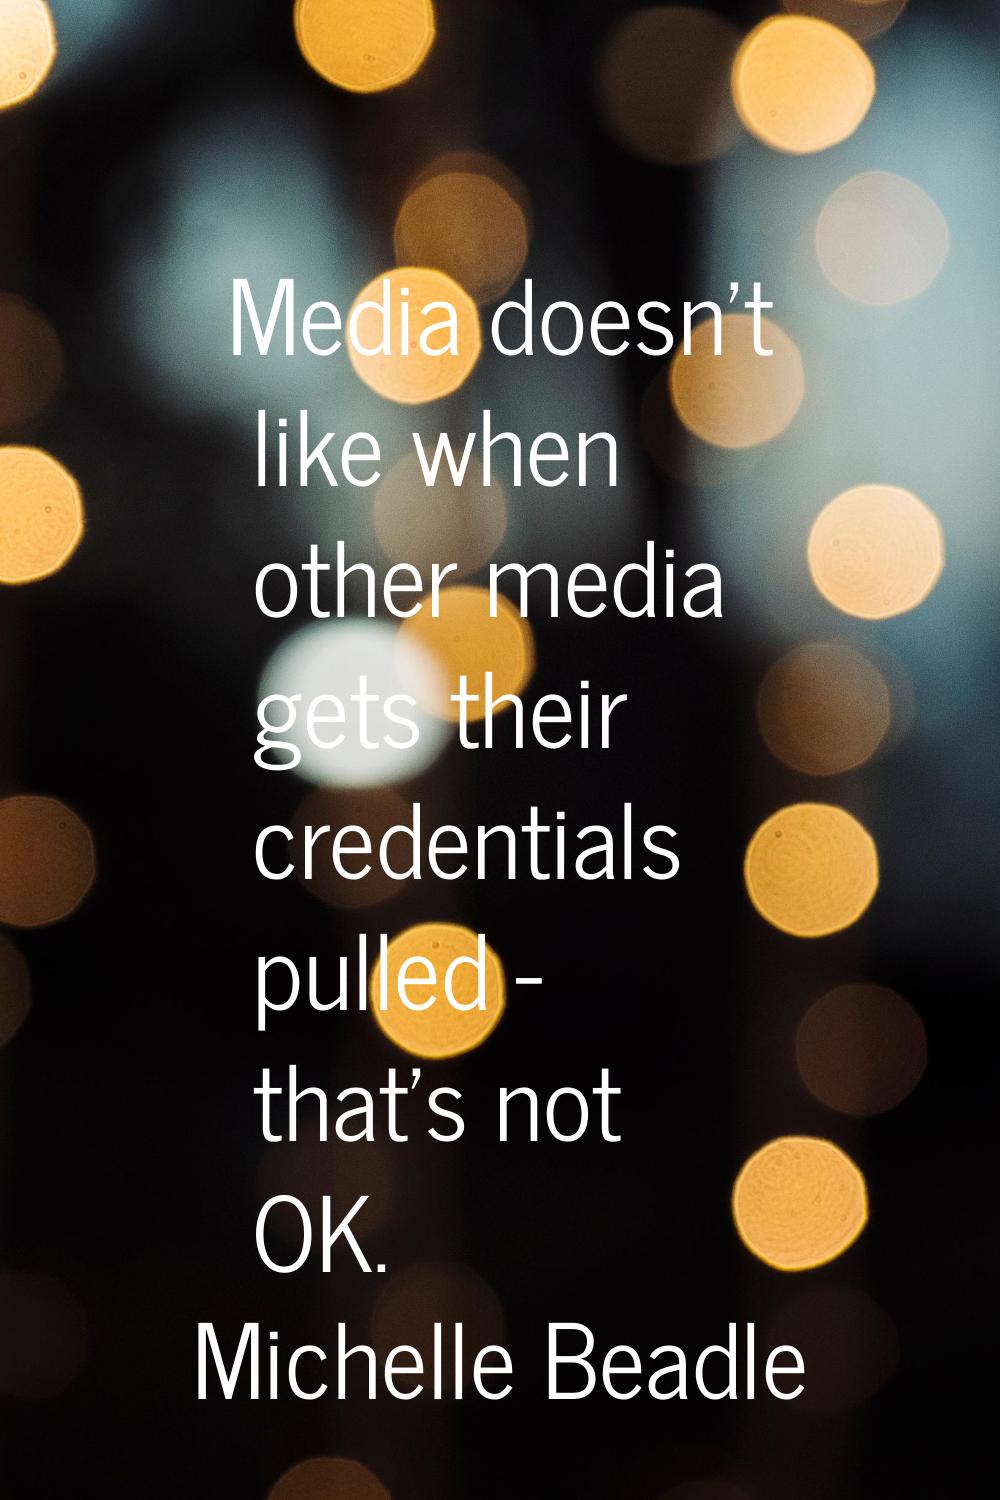 Media doesn't like when other media gets their credentials pulled - that's not OK.